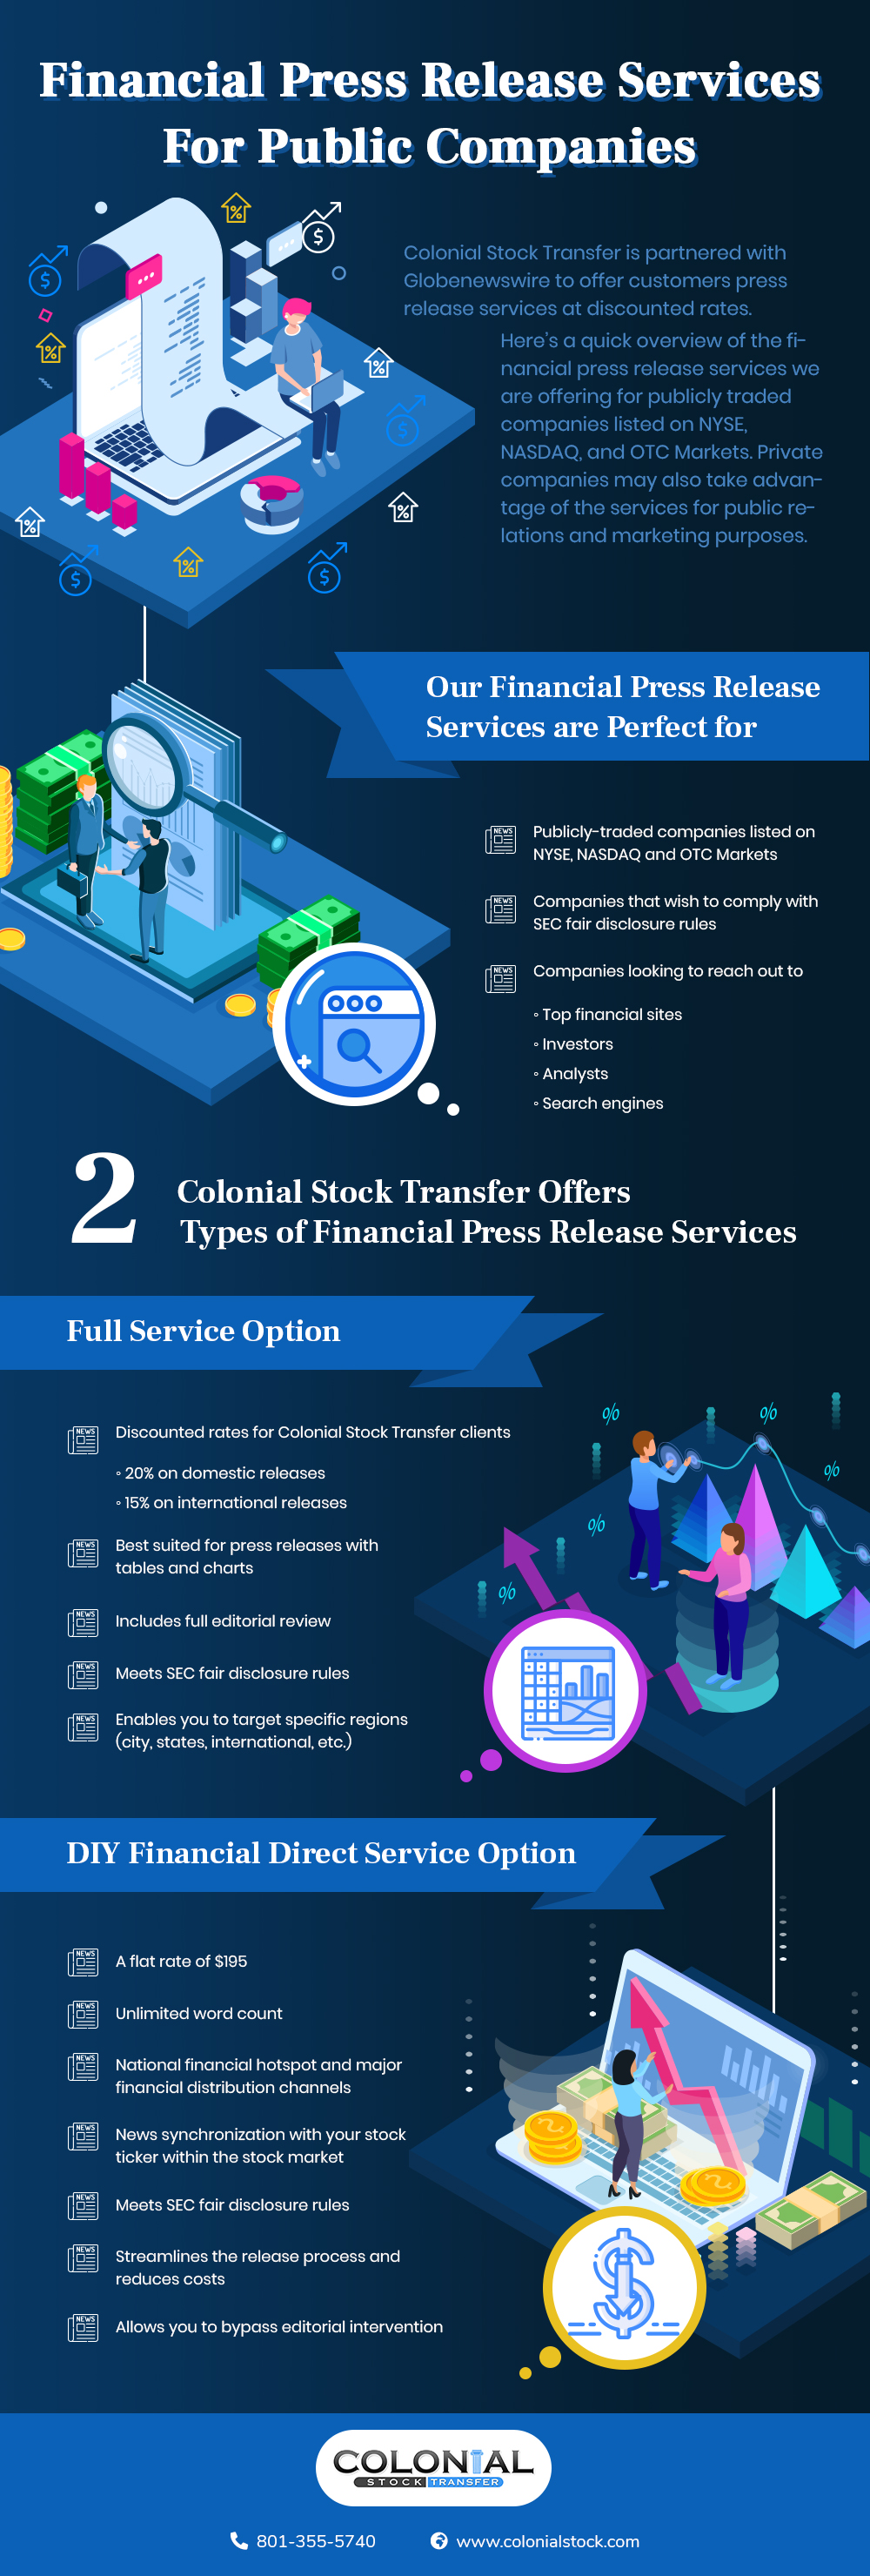 Financial press release services for public companies